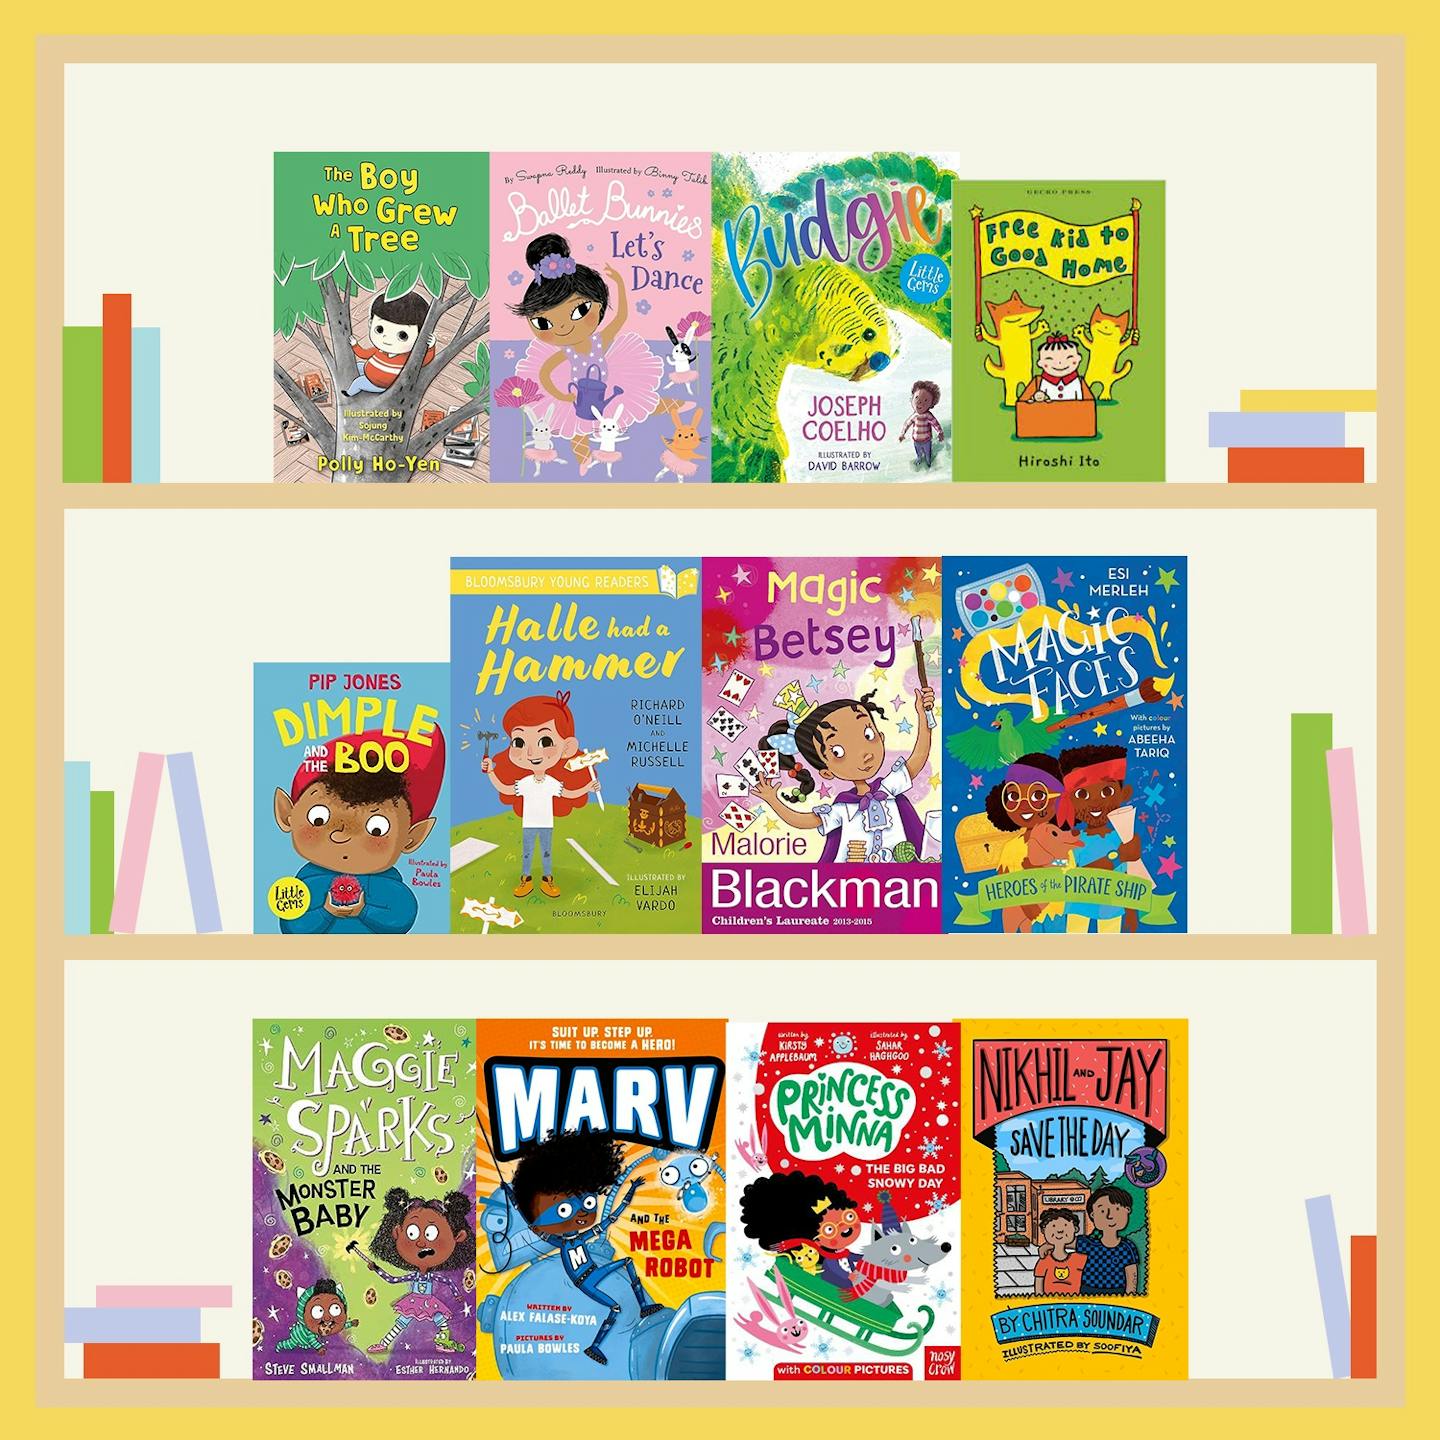 A graphic illustration of a yellow bookshelf packed with some of Inclusive Books for Children's recommended fiction for 5, 6 and 7 year olds. 